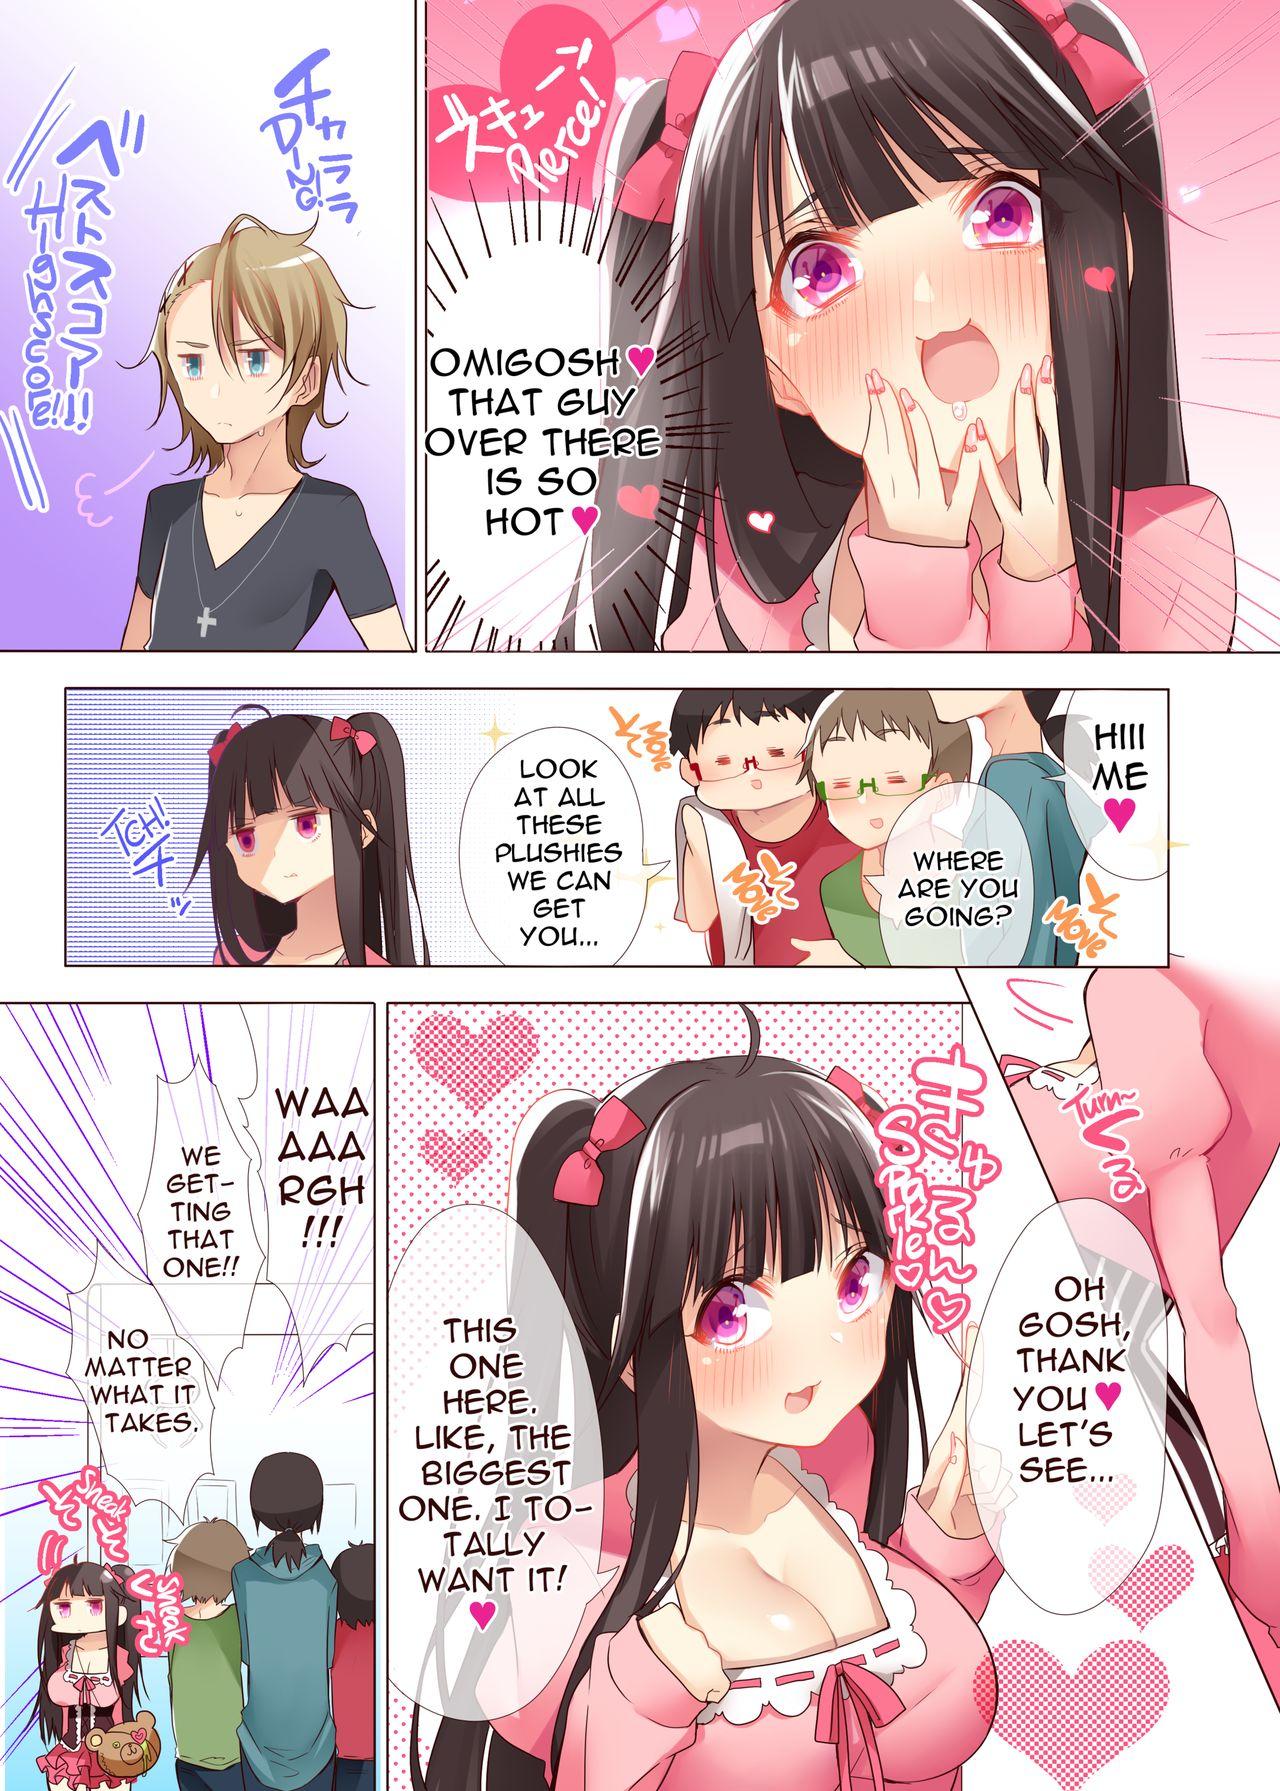 Double The Princess of an Otaku Group Got Knocked Up by Some Piece of Trash So She Let an Otaku Guy Do Her Too!? - Original Free Rough Porn - Page 4